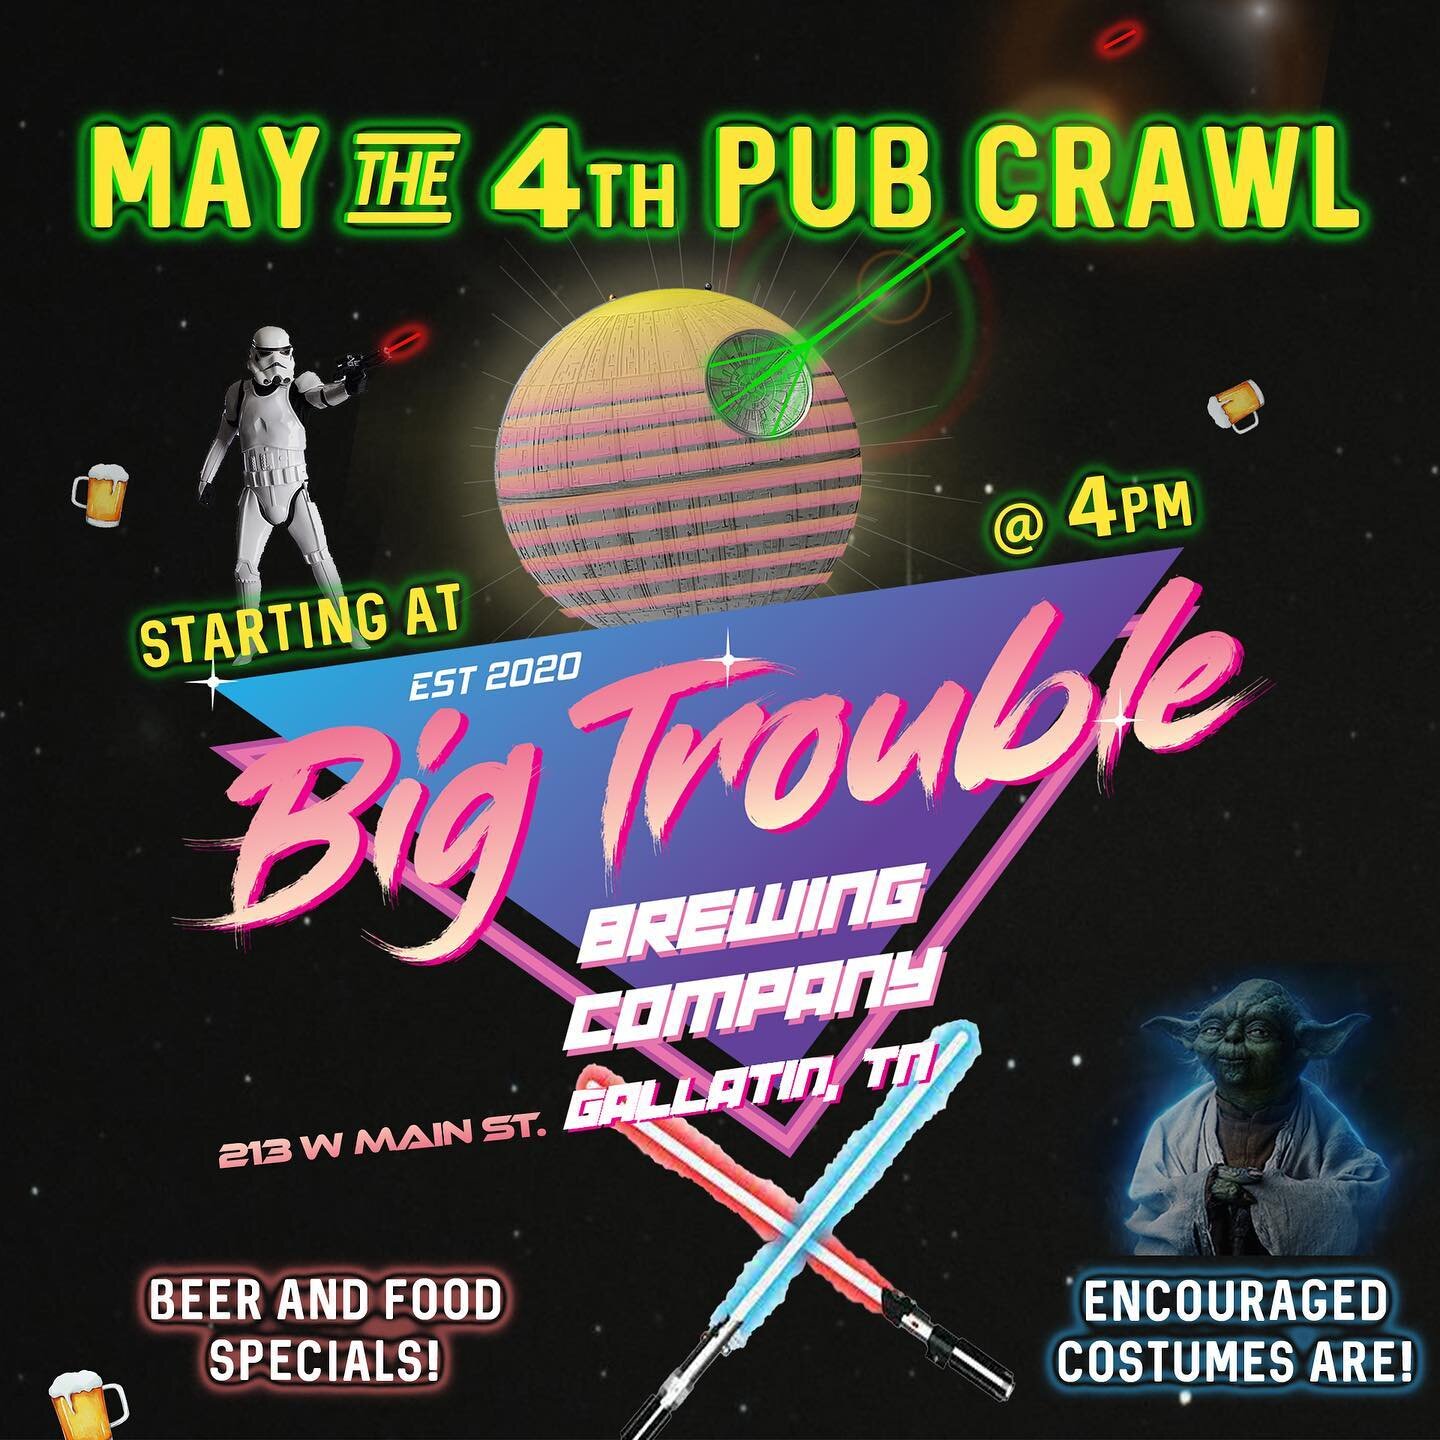 Let&rsquo;s go! No trivia this week, but we&rsquo;ll be rocking some games on May the 4th! 
.
Thanks to the regular extraordinaire @elliott_daniel for the design.